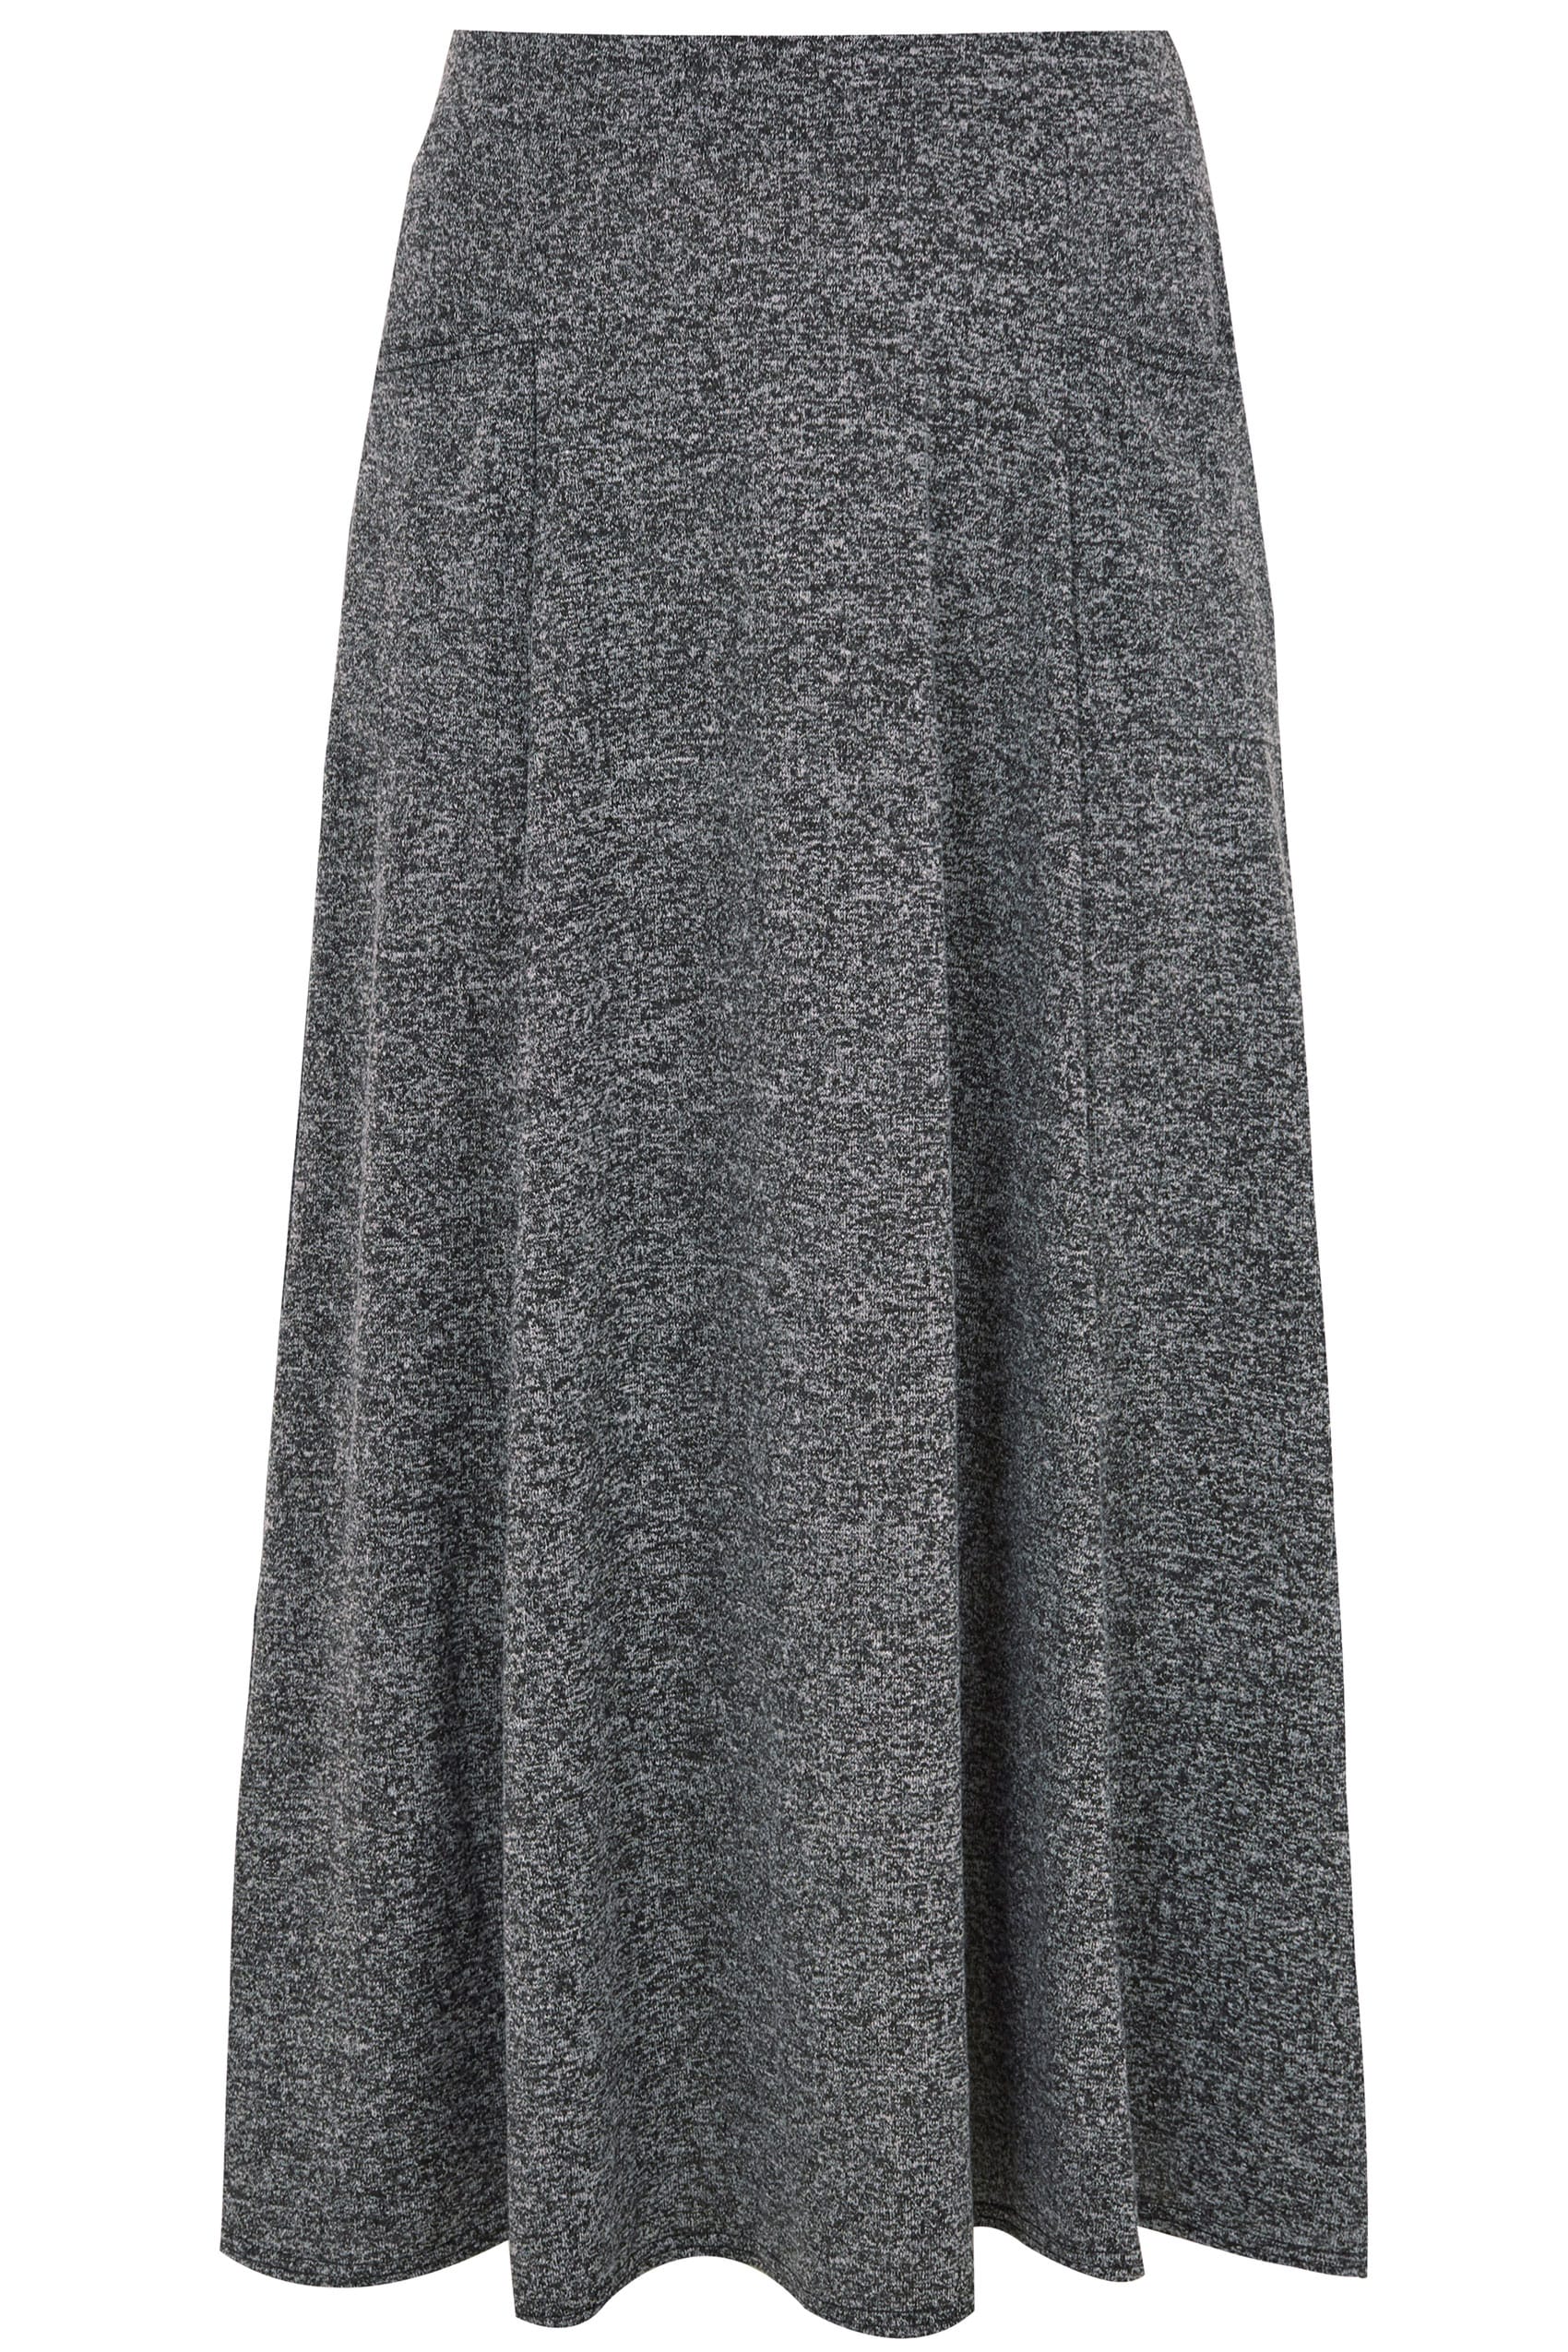 Grey Knitted Maxi Skirt With Pockets , Plus size 16 to 36